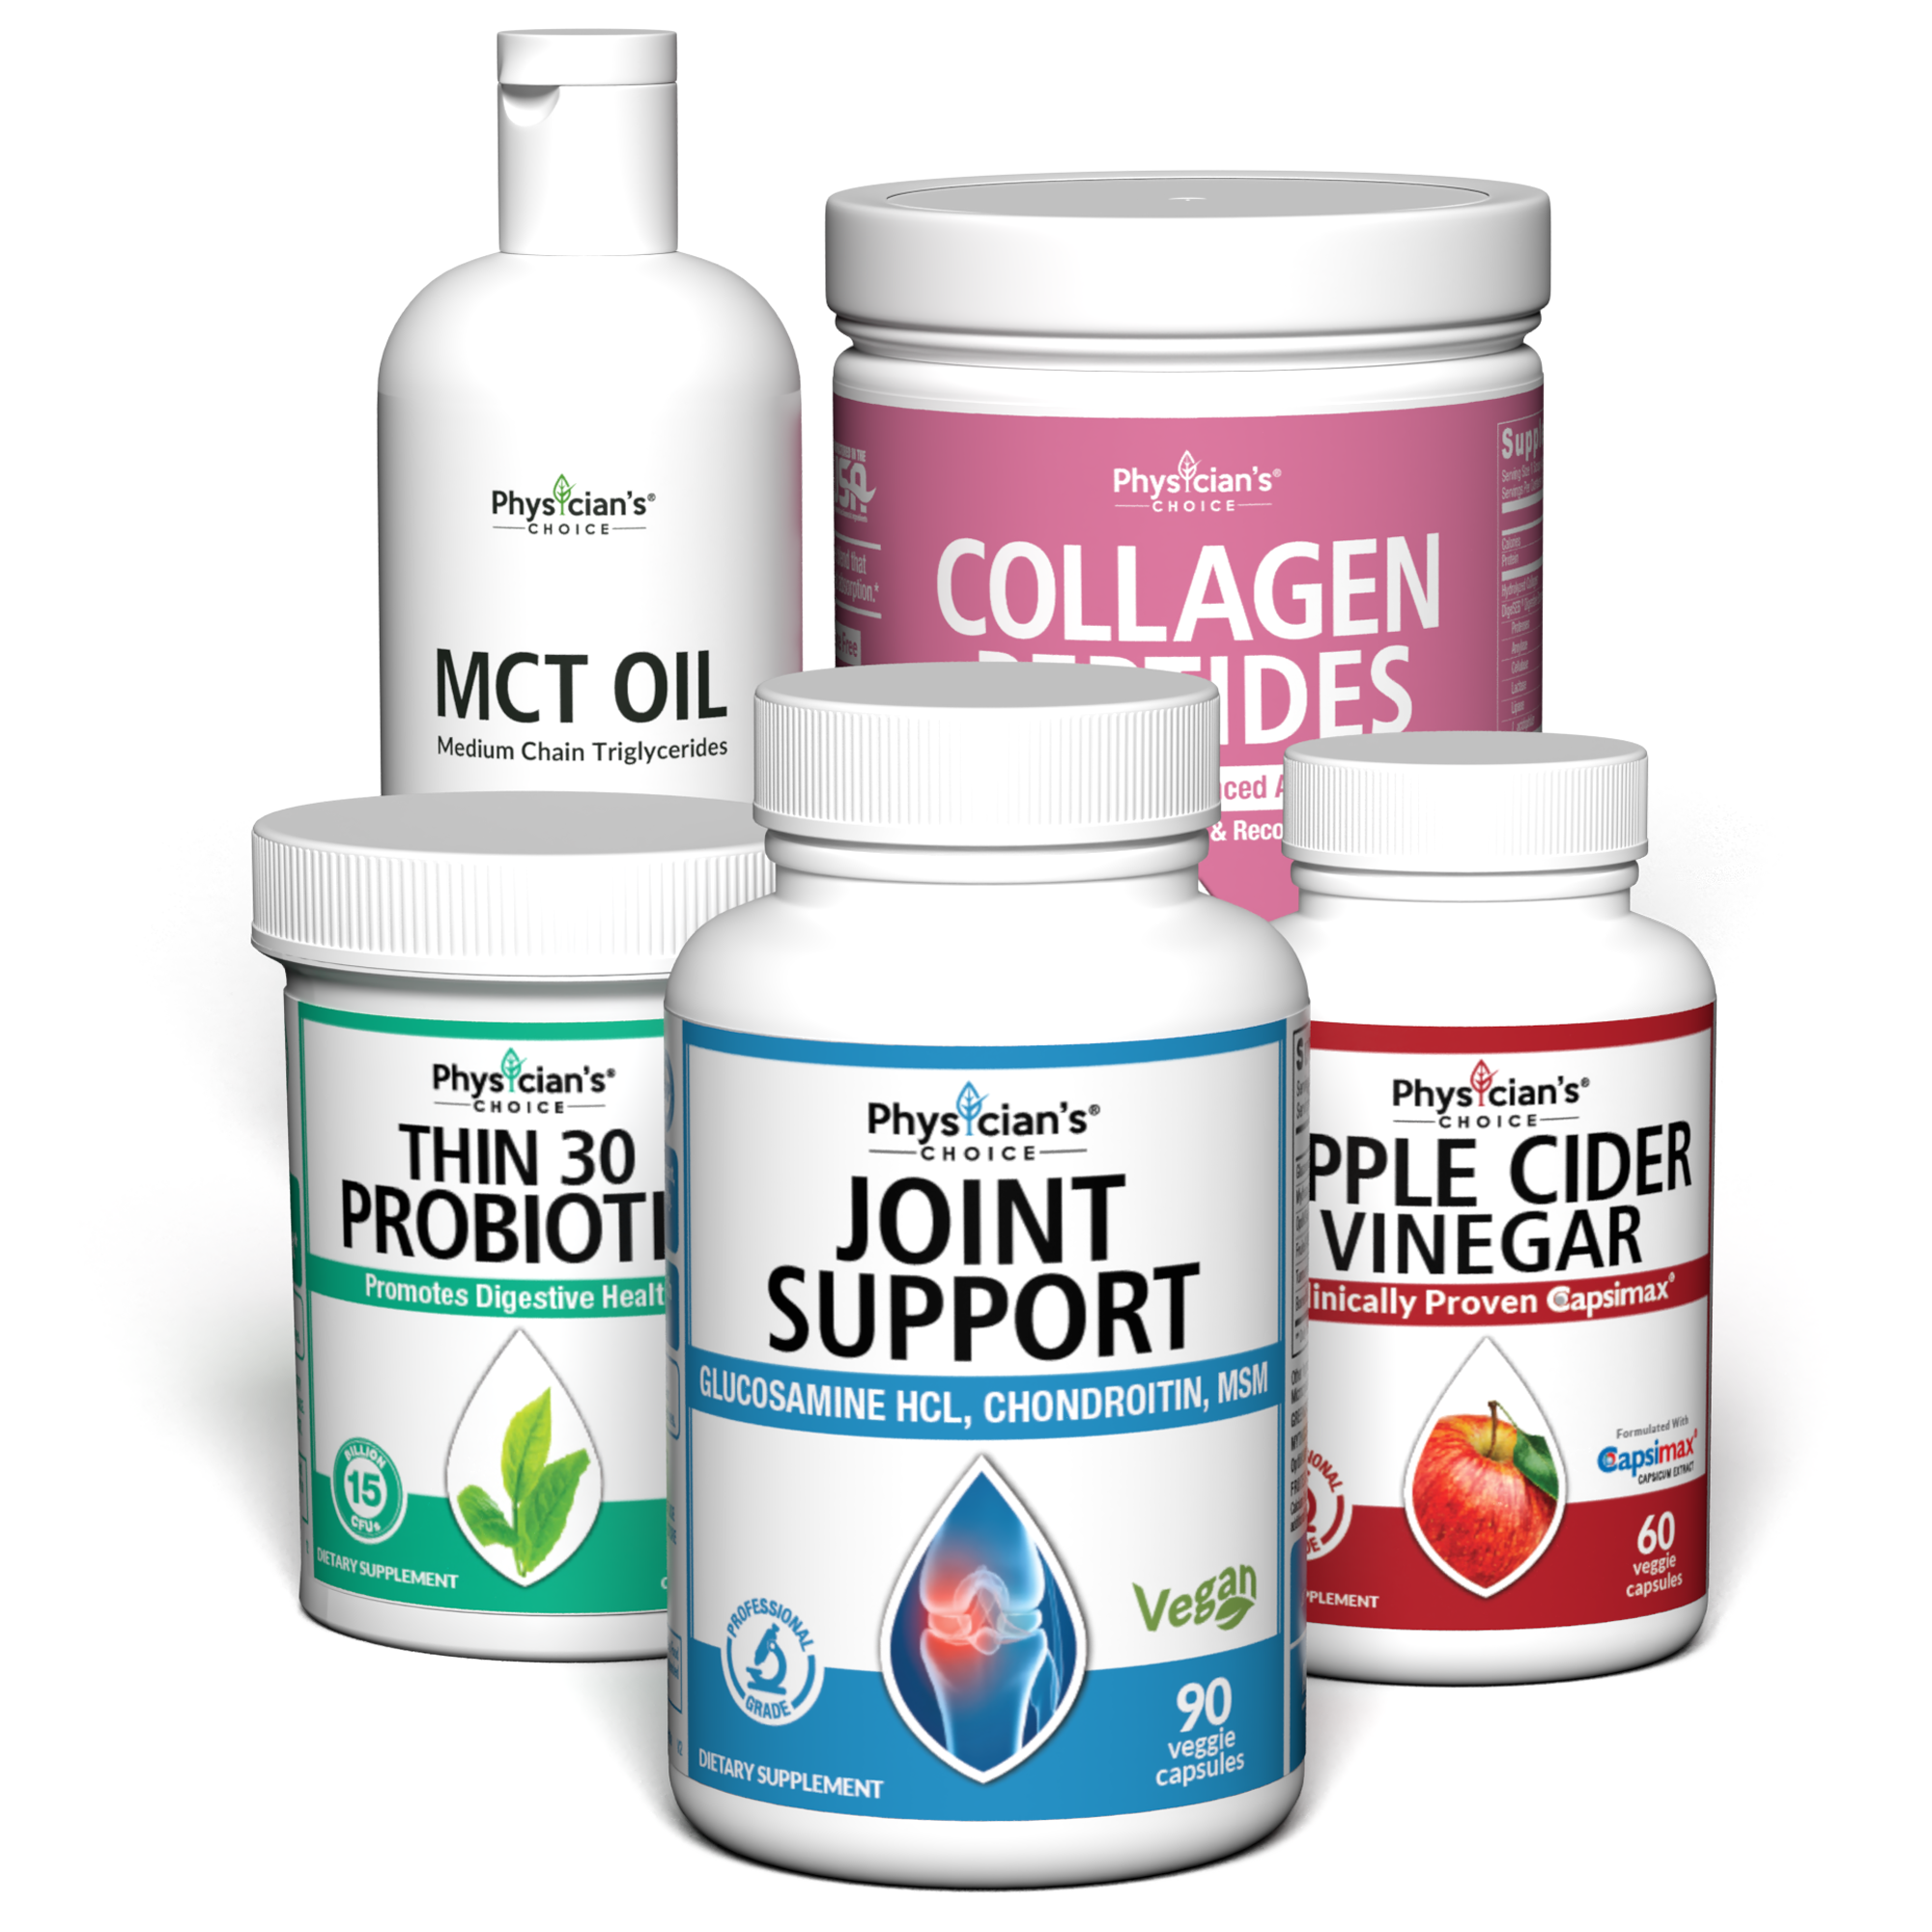 Fitness and Athletics Bundle with Joint Support, Thin 30 Probiotic, Apple Cider Vinegar, Collagen Peptides, and MCT Oil